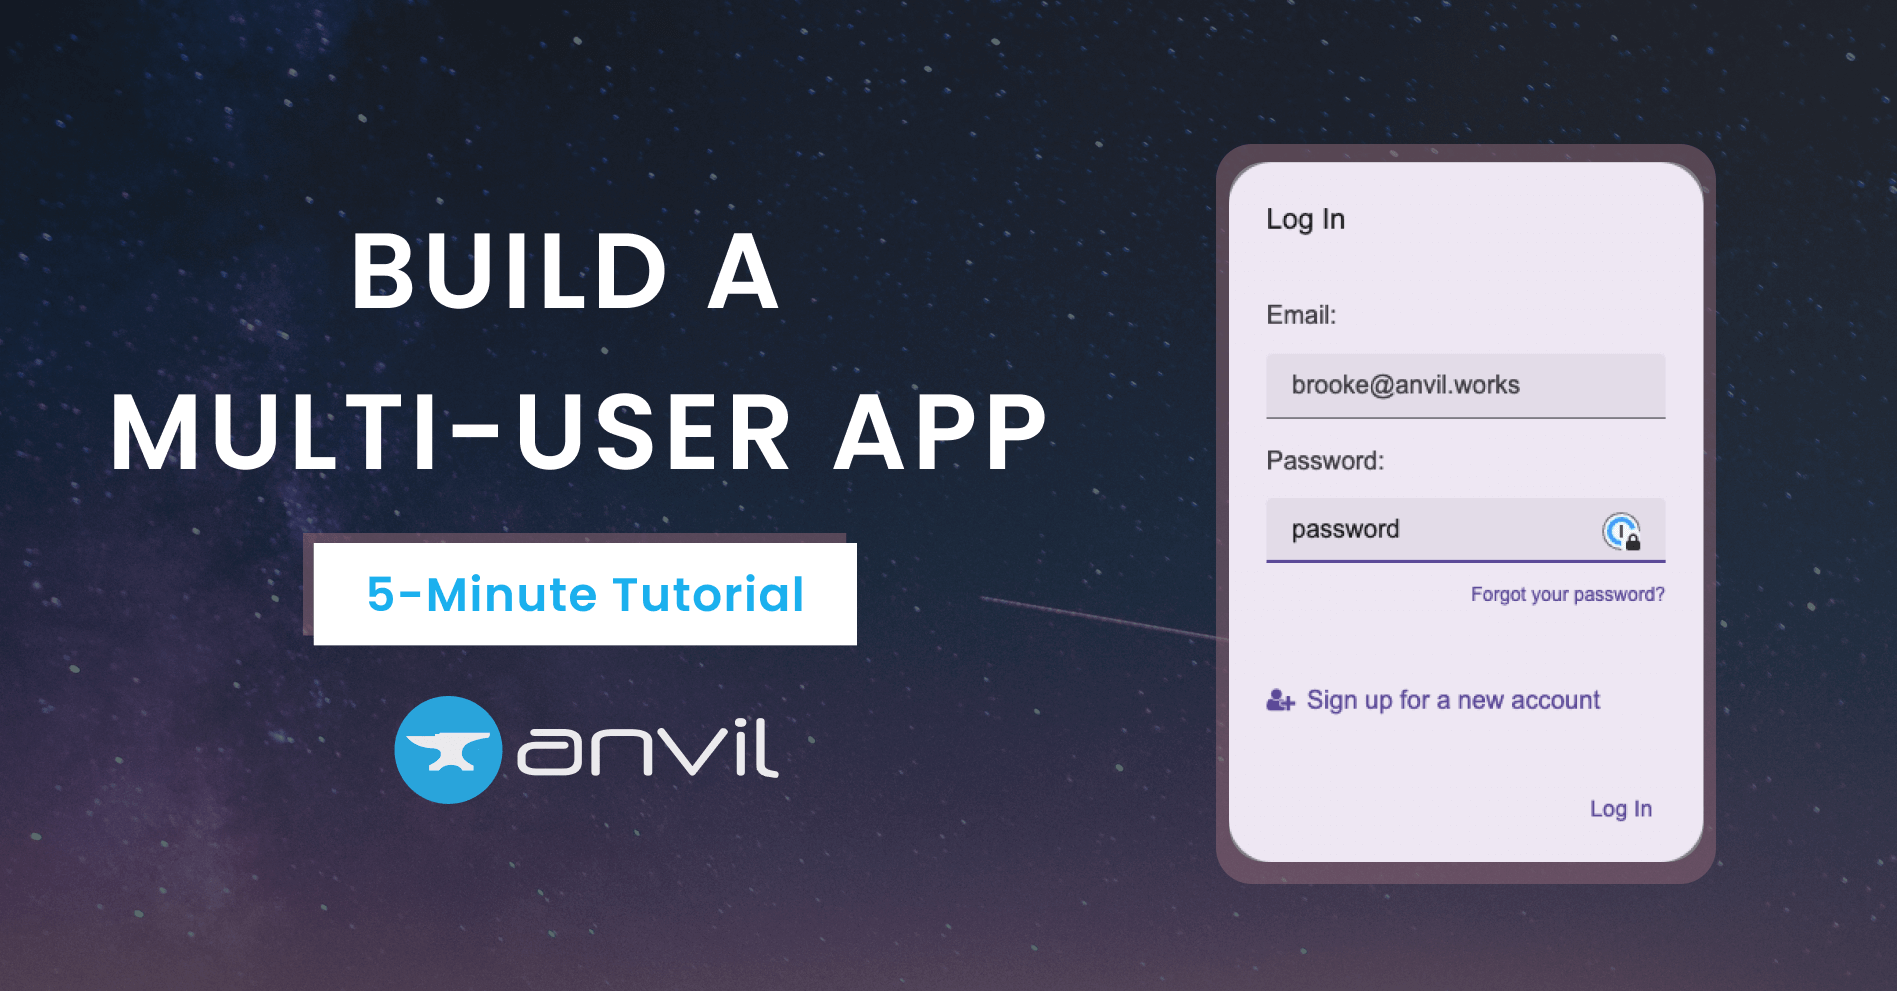 Learn how to build multi-user applications with a quick tutorial.